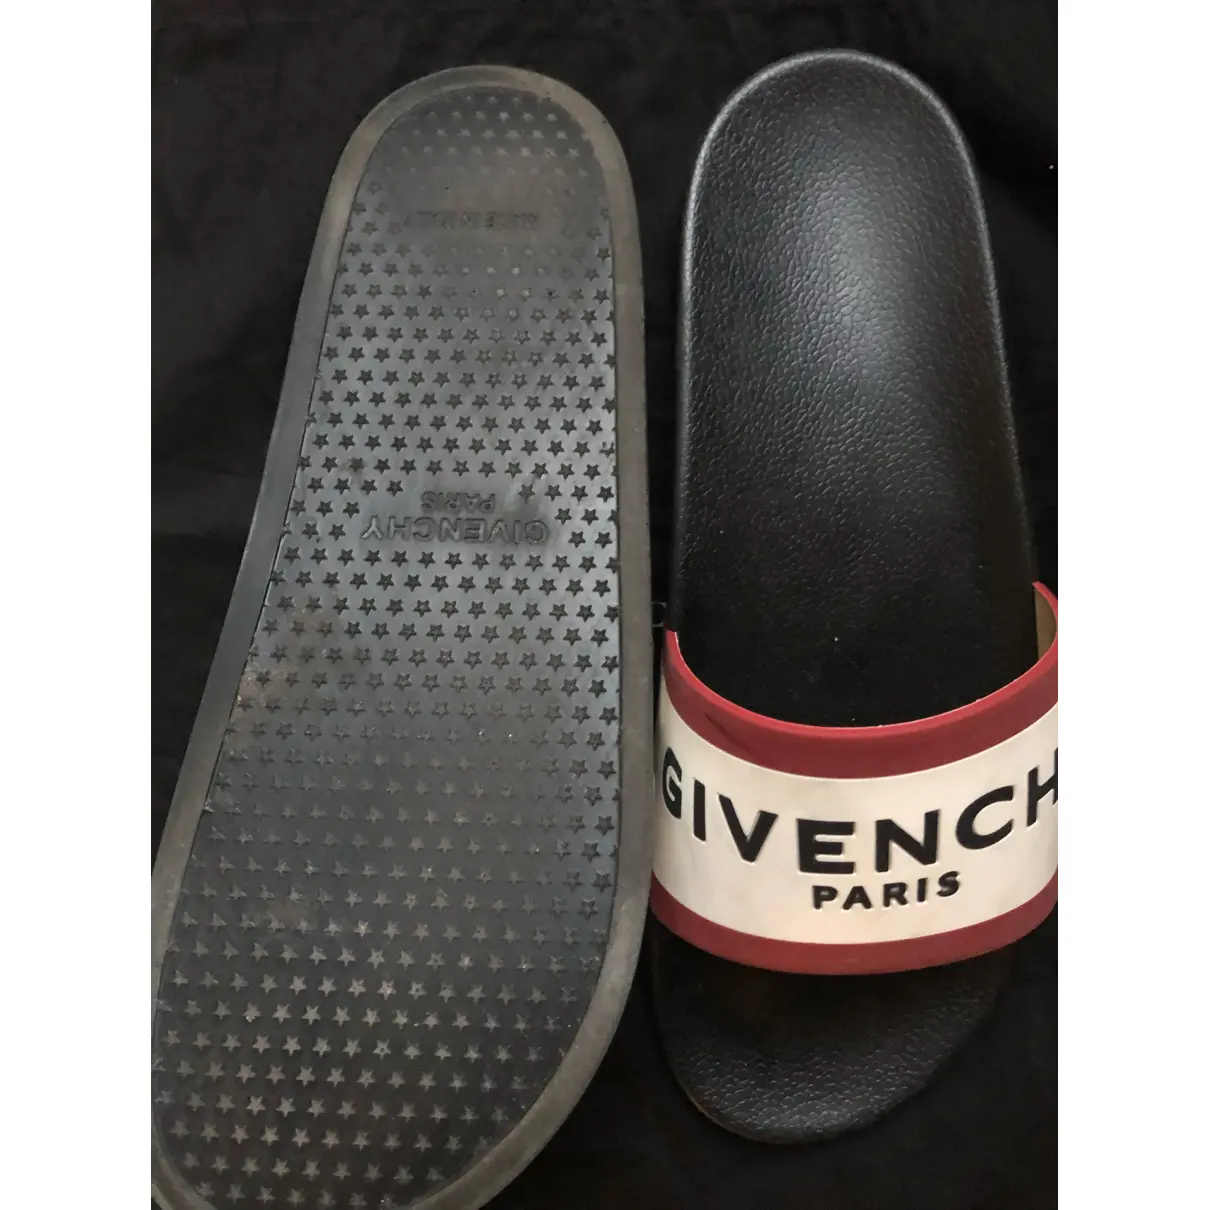 Luxury Givenchy Sandals Men